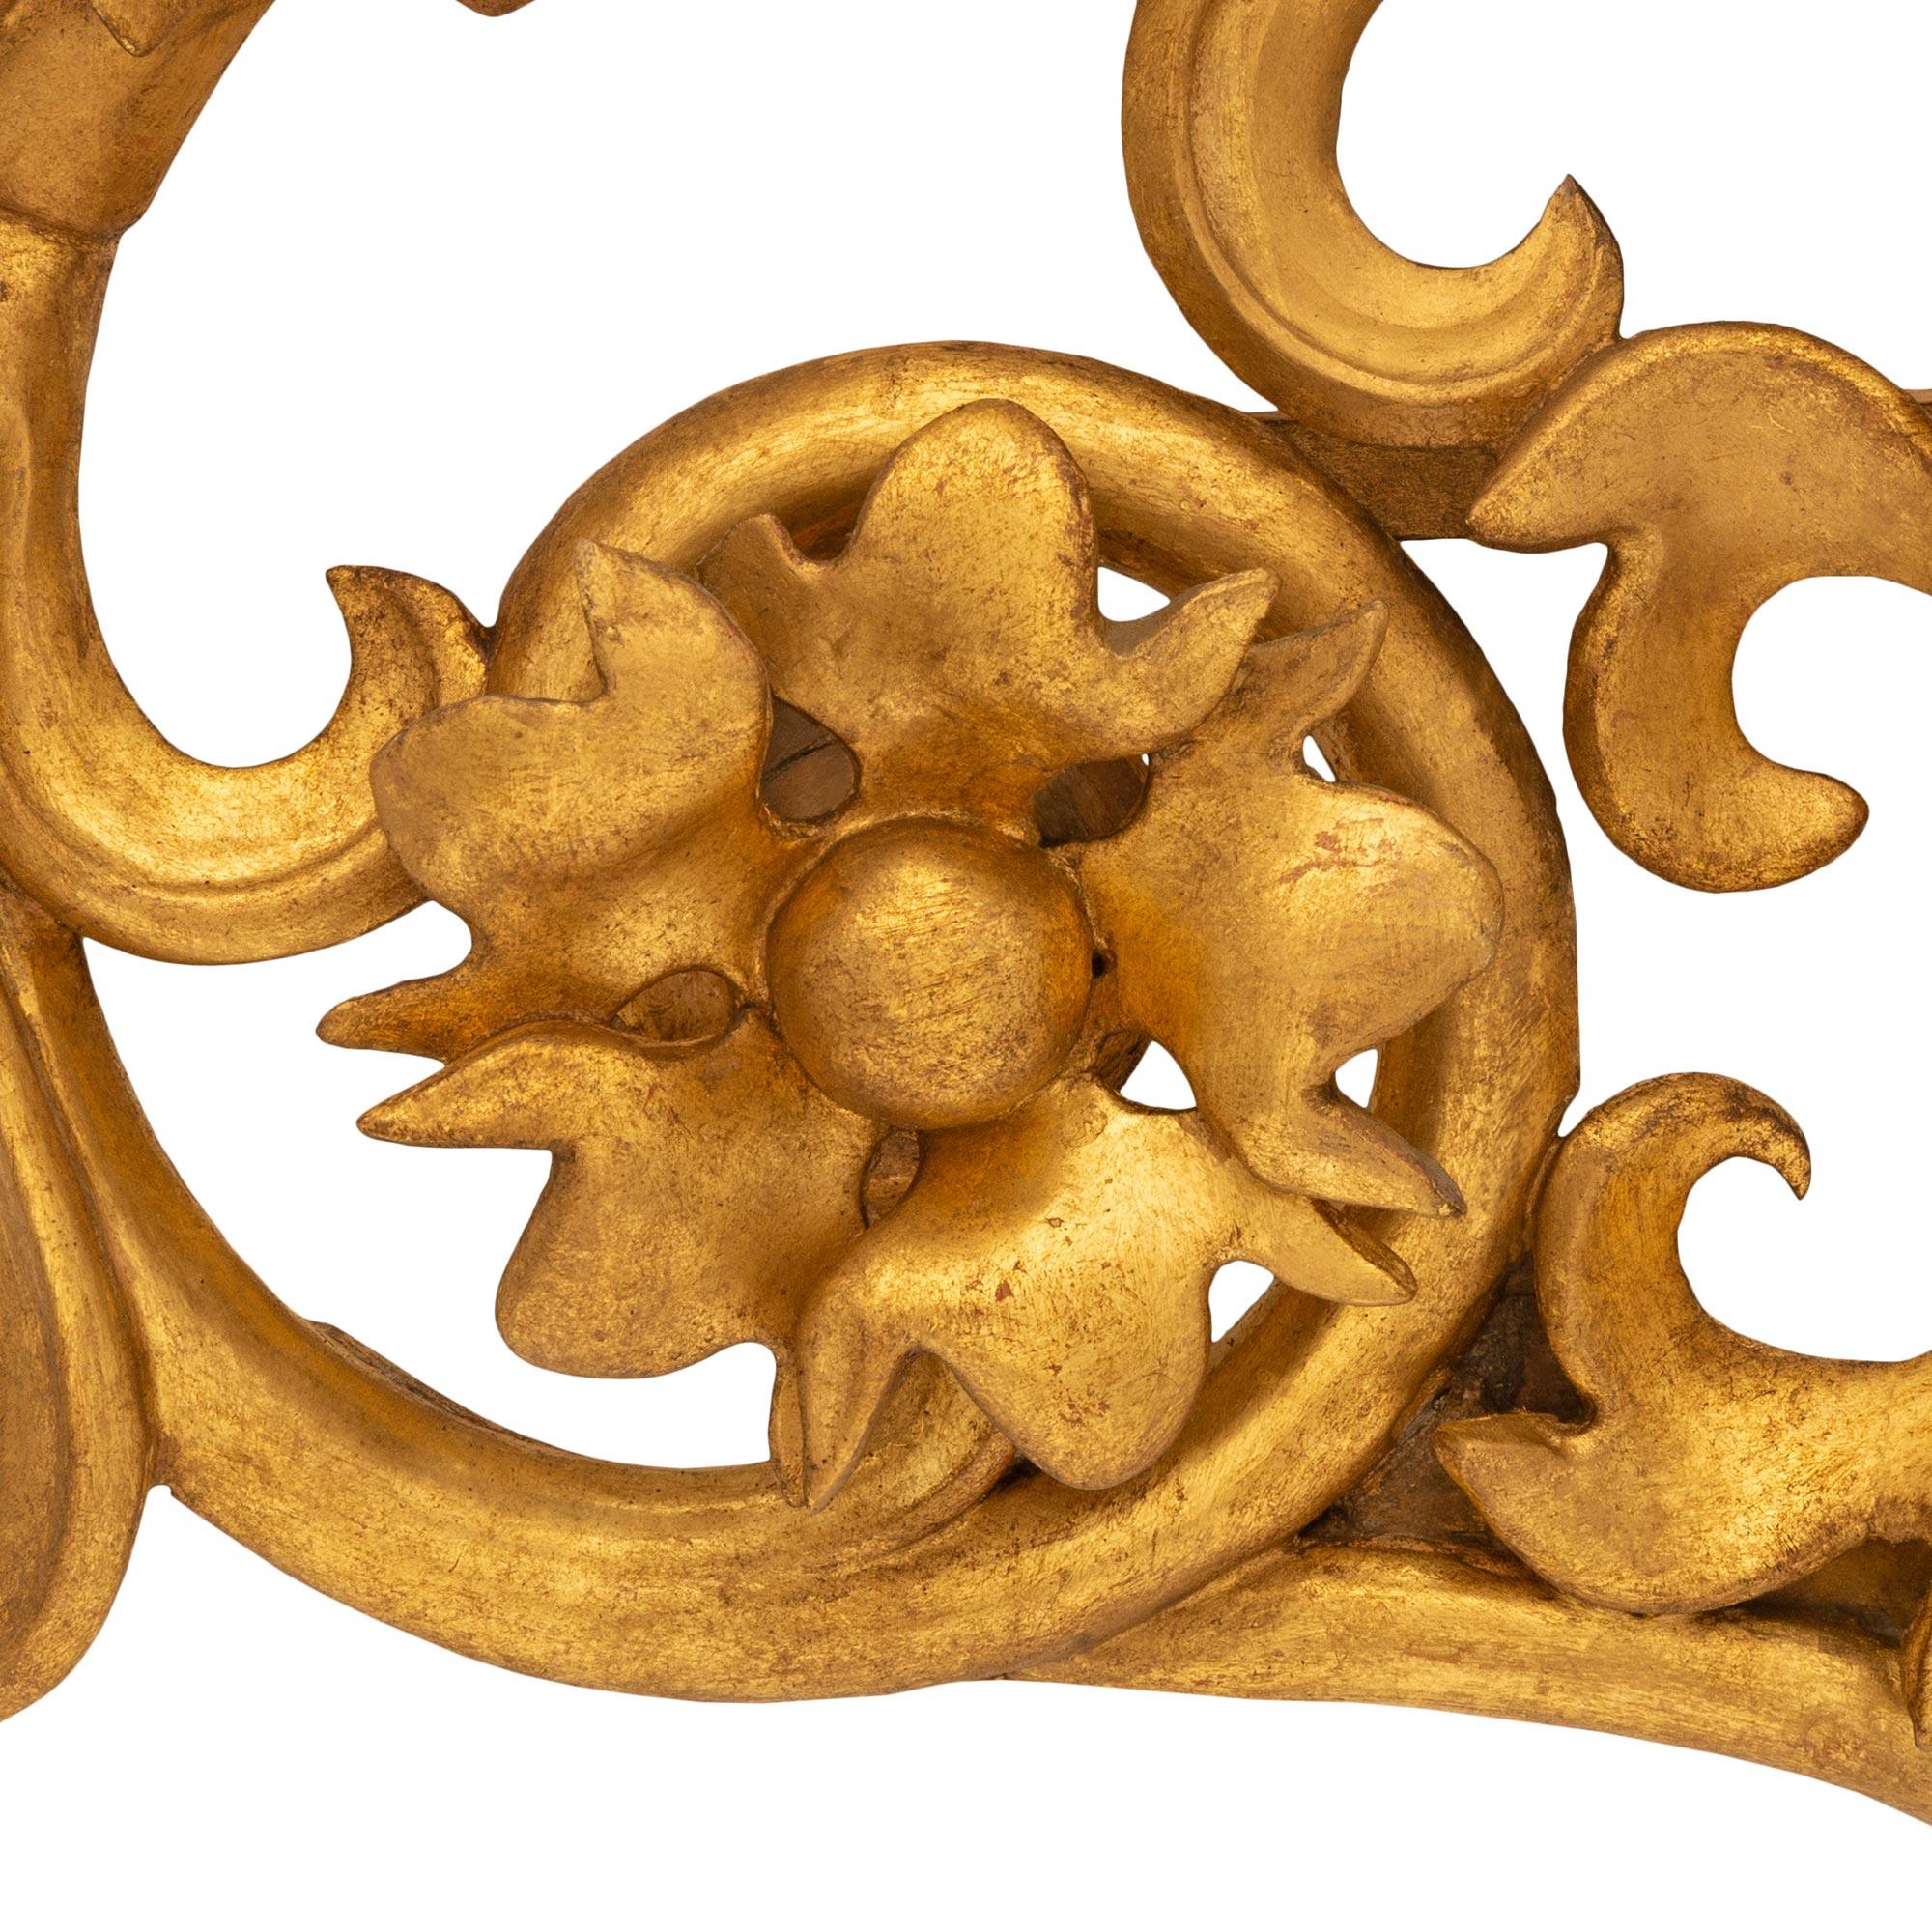 A very decorative pair of Italian 18th century Baroque st. Giltwood wall decor. Each pierced wall decor has a central double acanthus leaf with two 'C' and 'S' scrolled foliate branches which protrude outwards and join at the top. The bottom 'C'